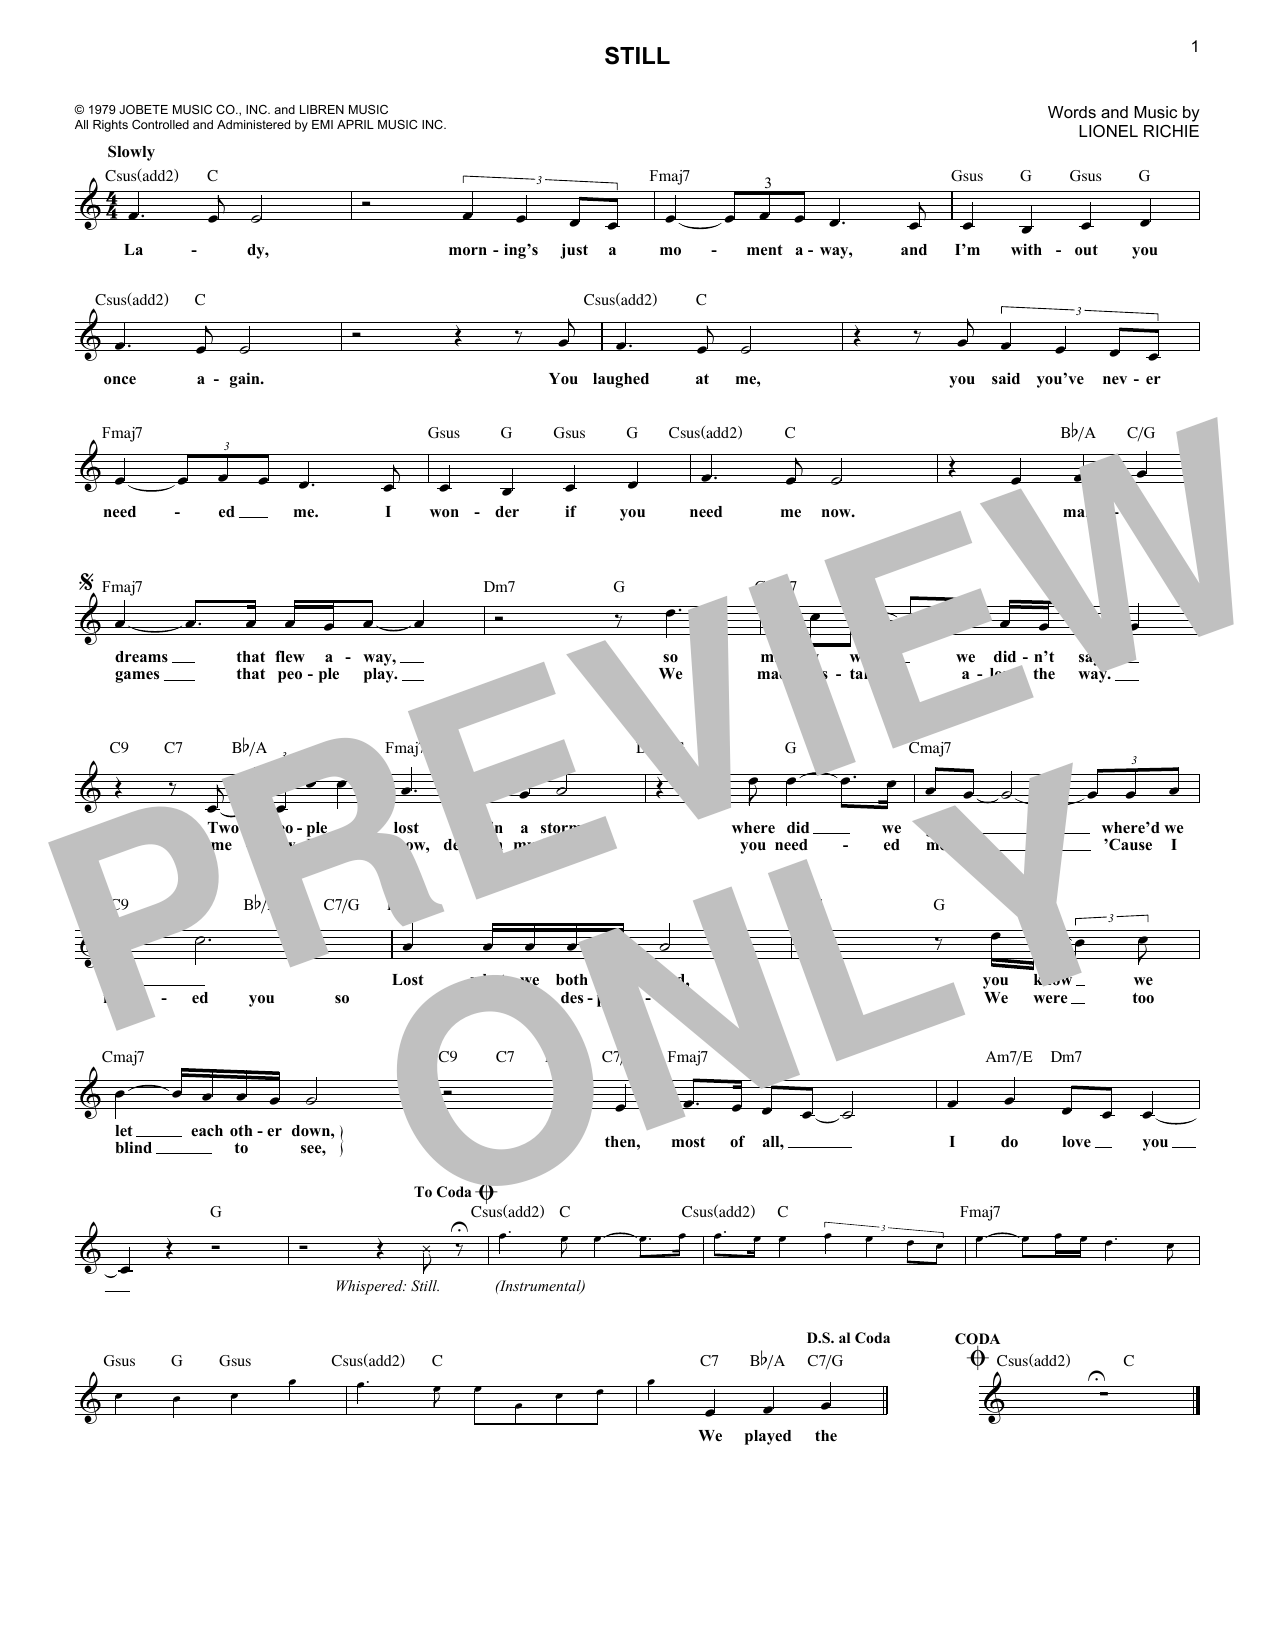 Download The Commodores Still Sheet Music